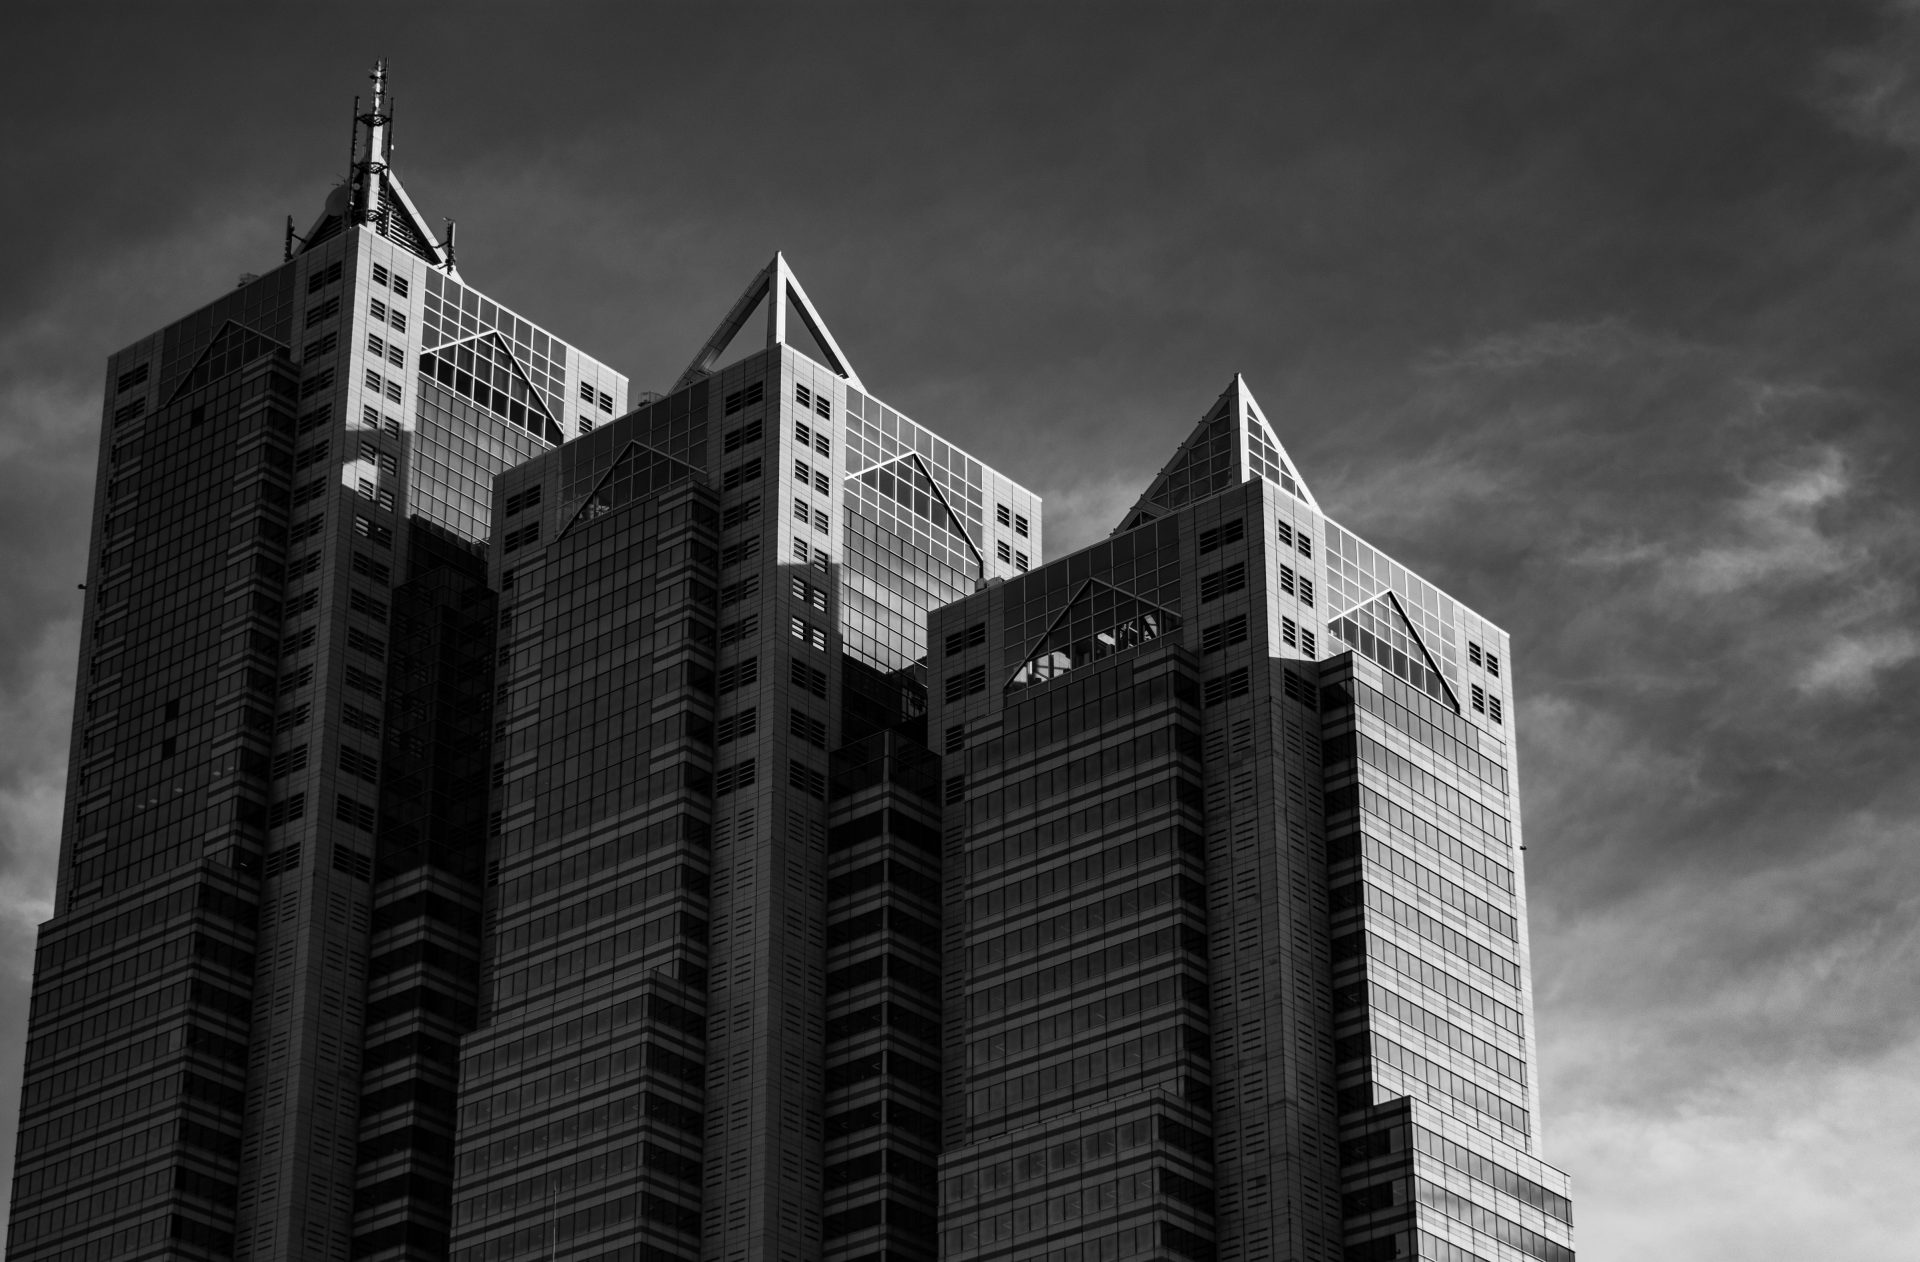 three same style building in the harsh sunlight, black and white photography